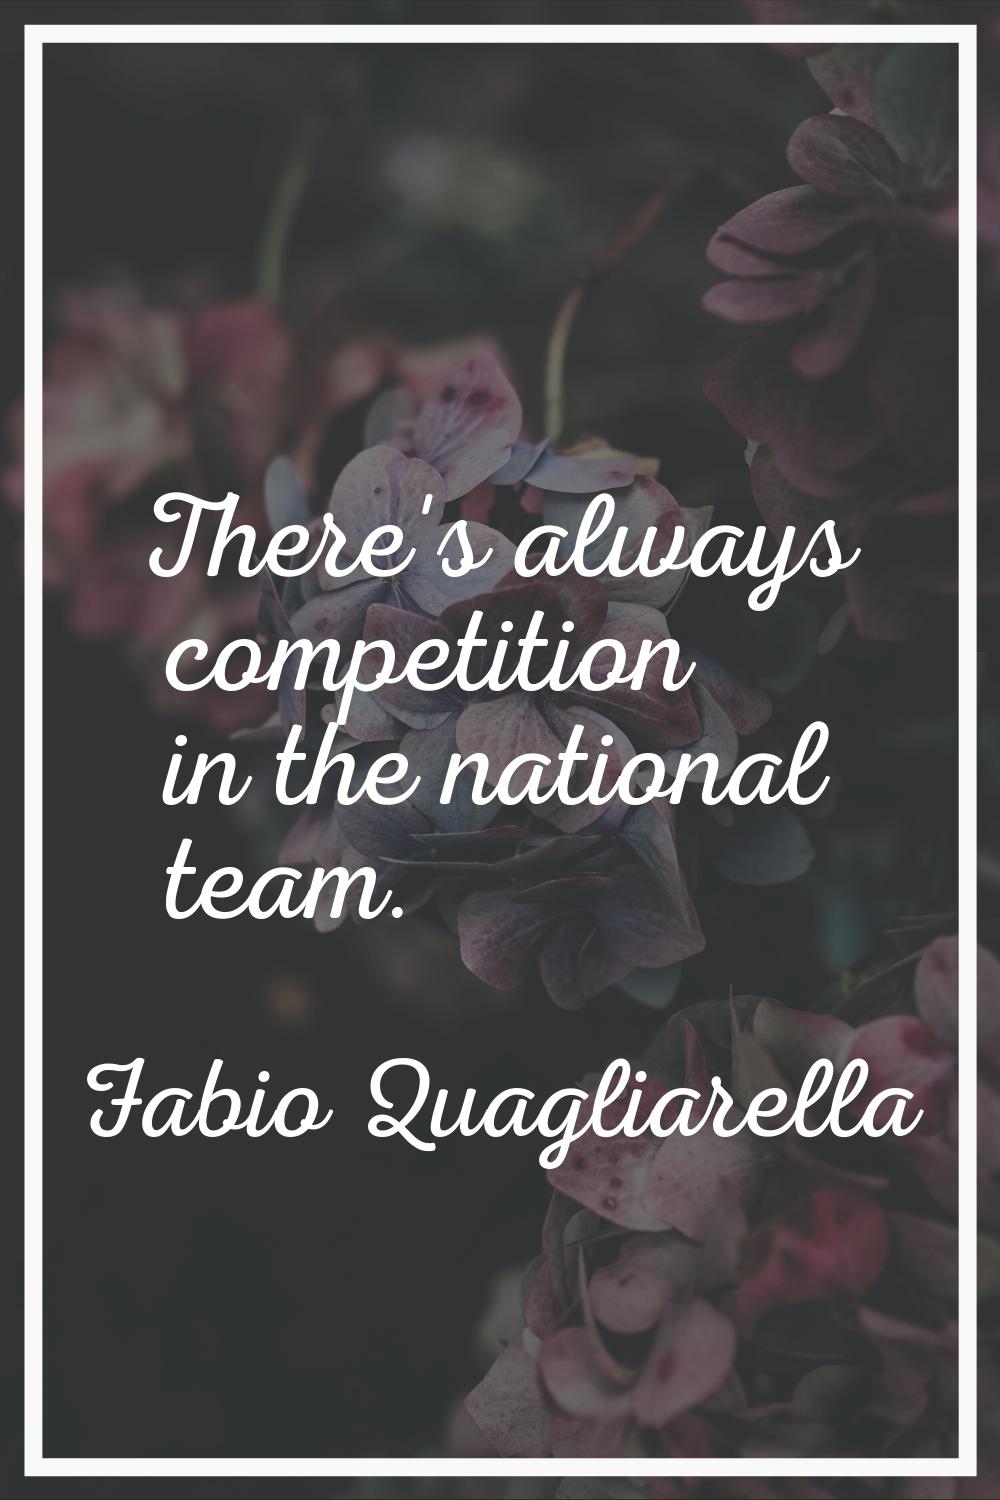 There's always competition in the national team.